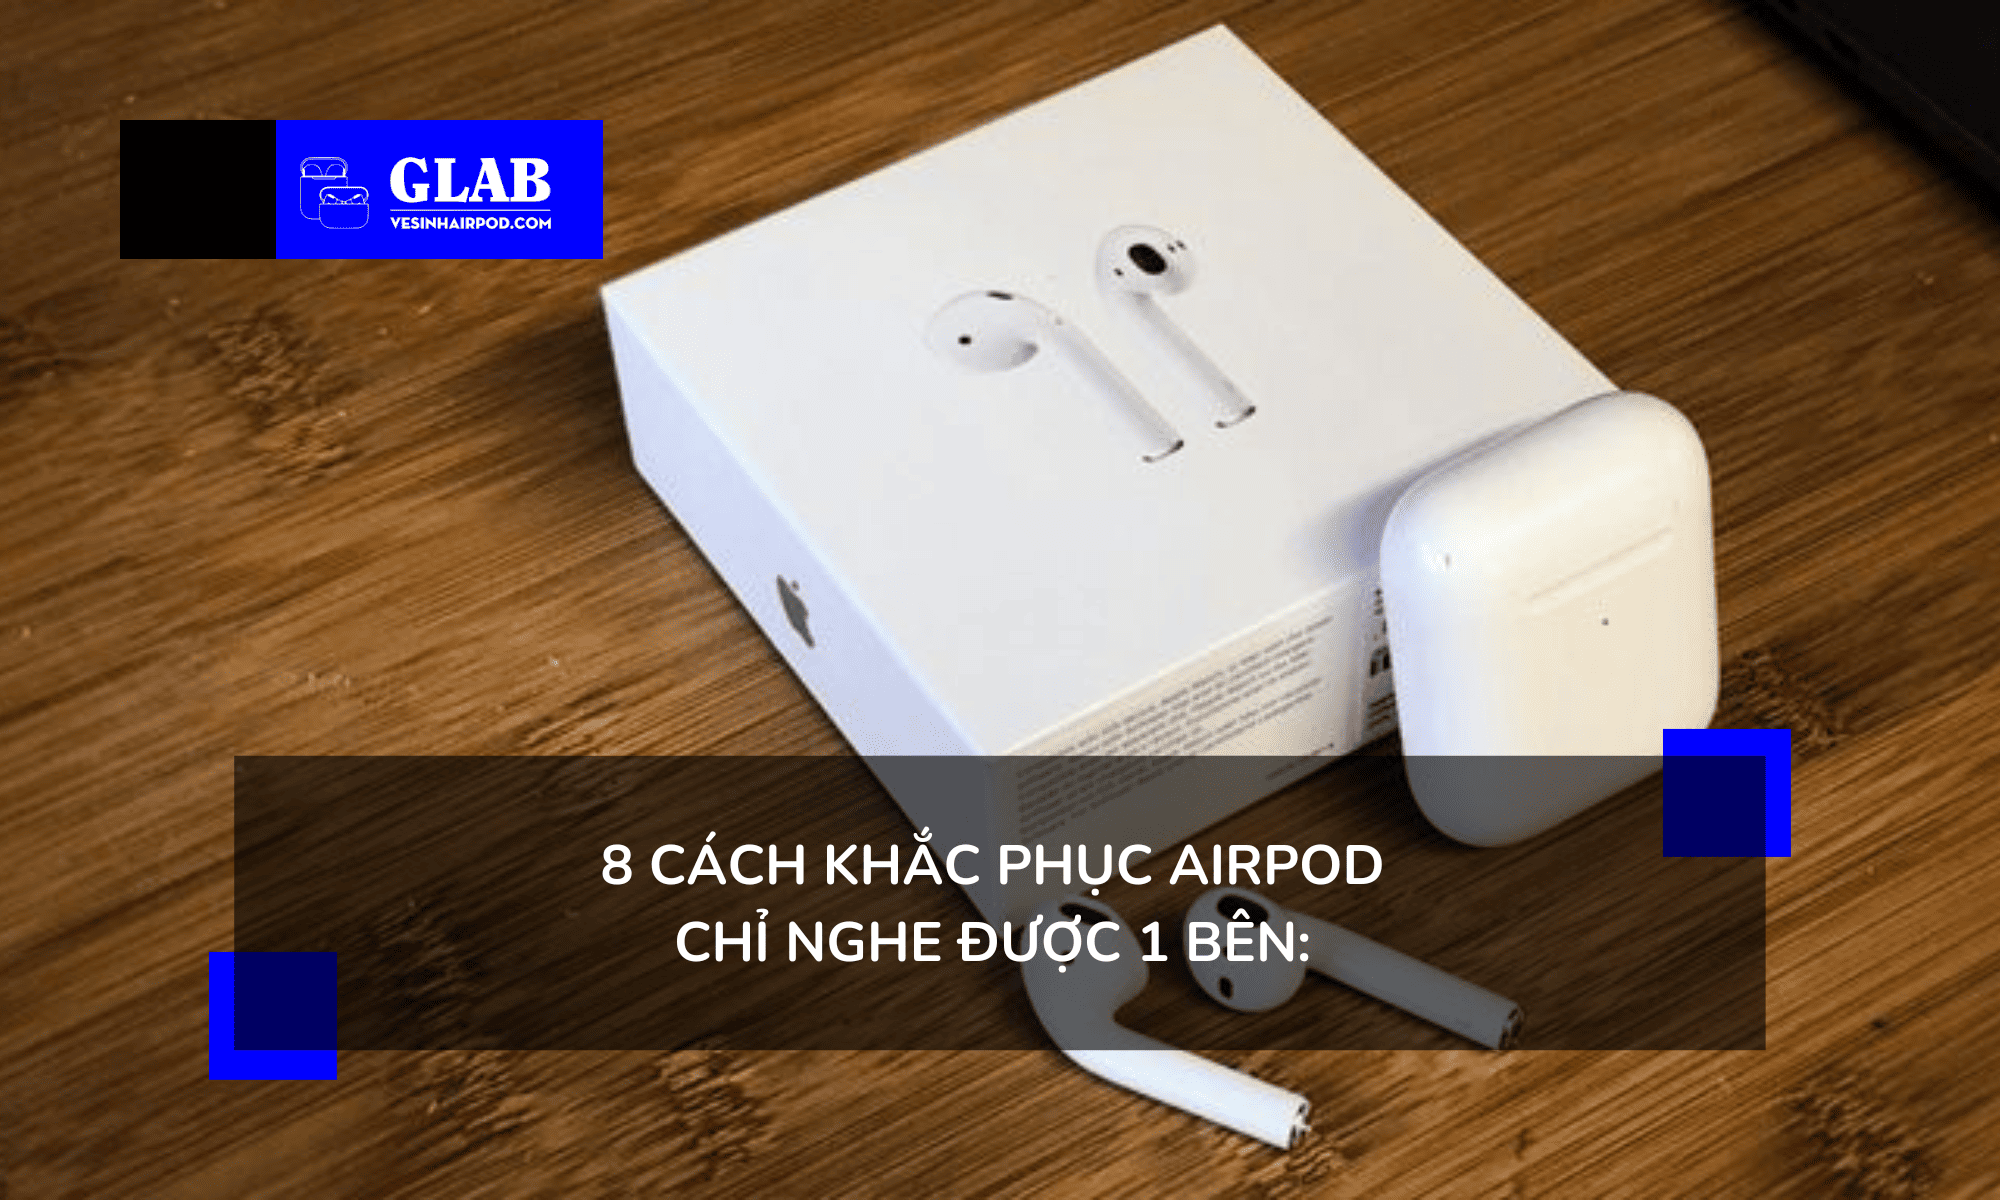 airpods-chi-nghe-duoc-1-ben